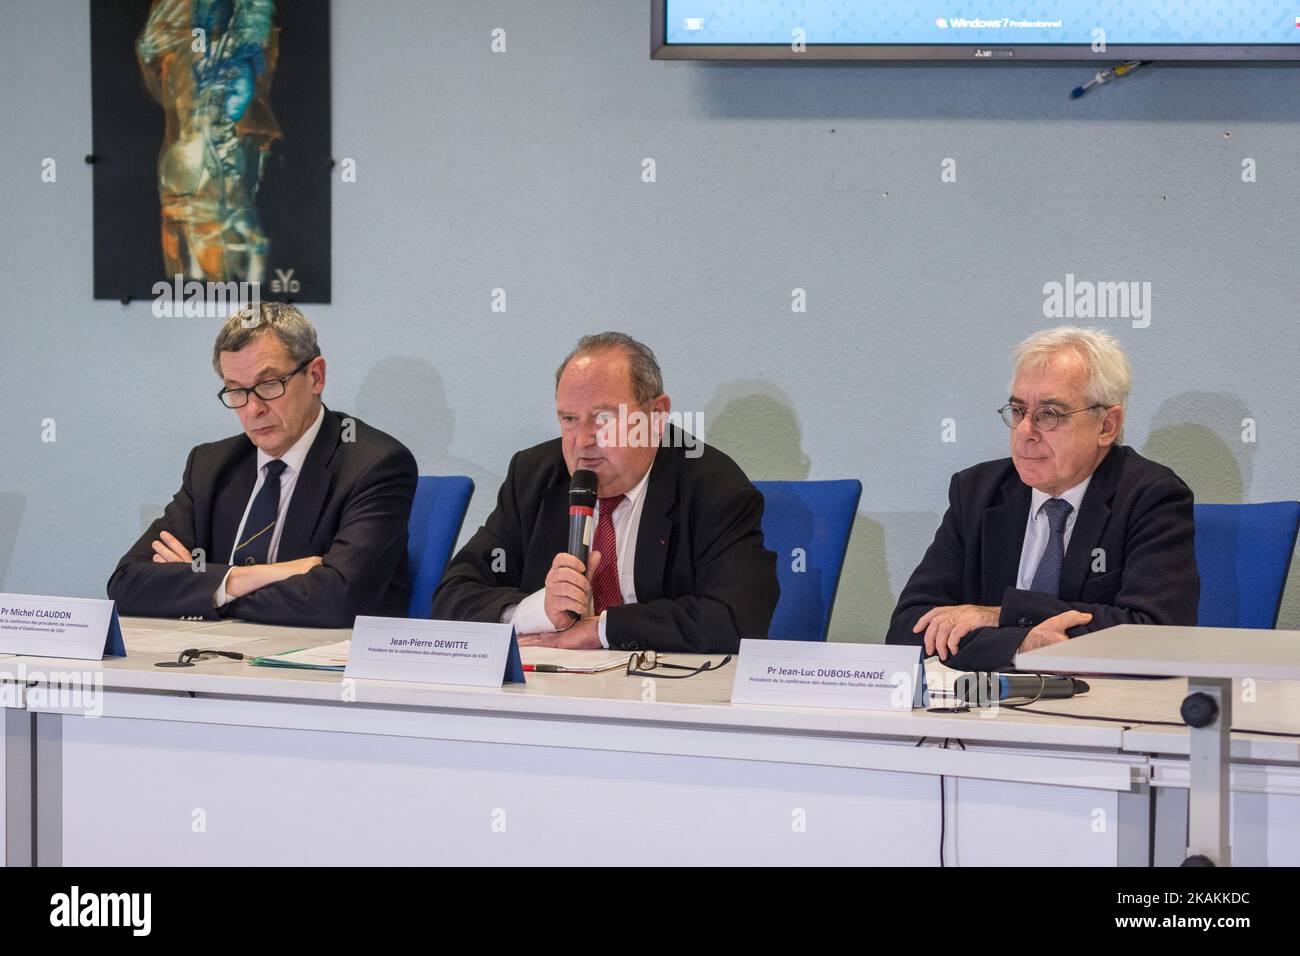 TJean-Pierre Dewitte (C) speaks at a press conference titled A new deal for the future of CHU in Paris on February 7, 2017. Jean-Luc Dubois-Rande and Michel Claudon are pictured next to him. The conference was held at the School of Medicine. (Photo by Julien Mattia/NurPhoto) *** Please Use Credit from Credit Field *** Stock Photo